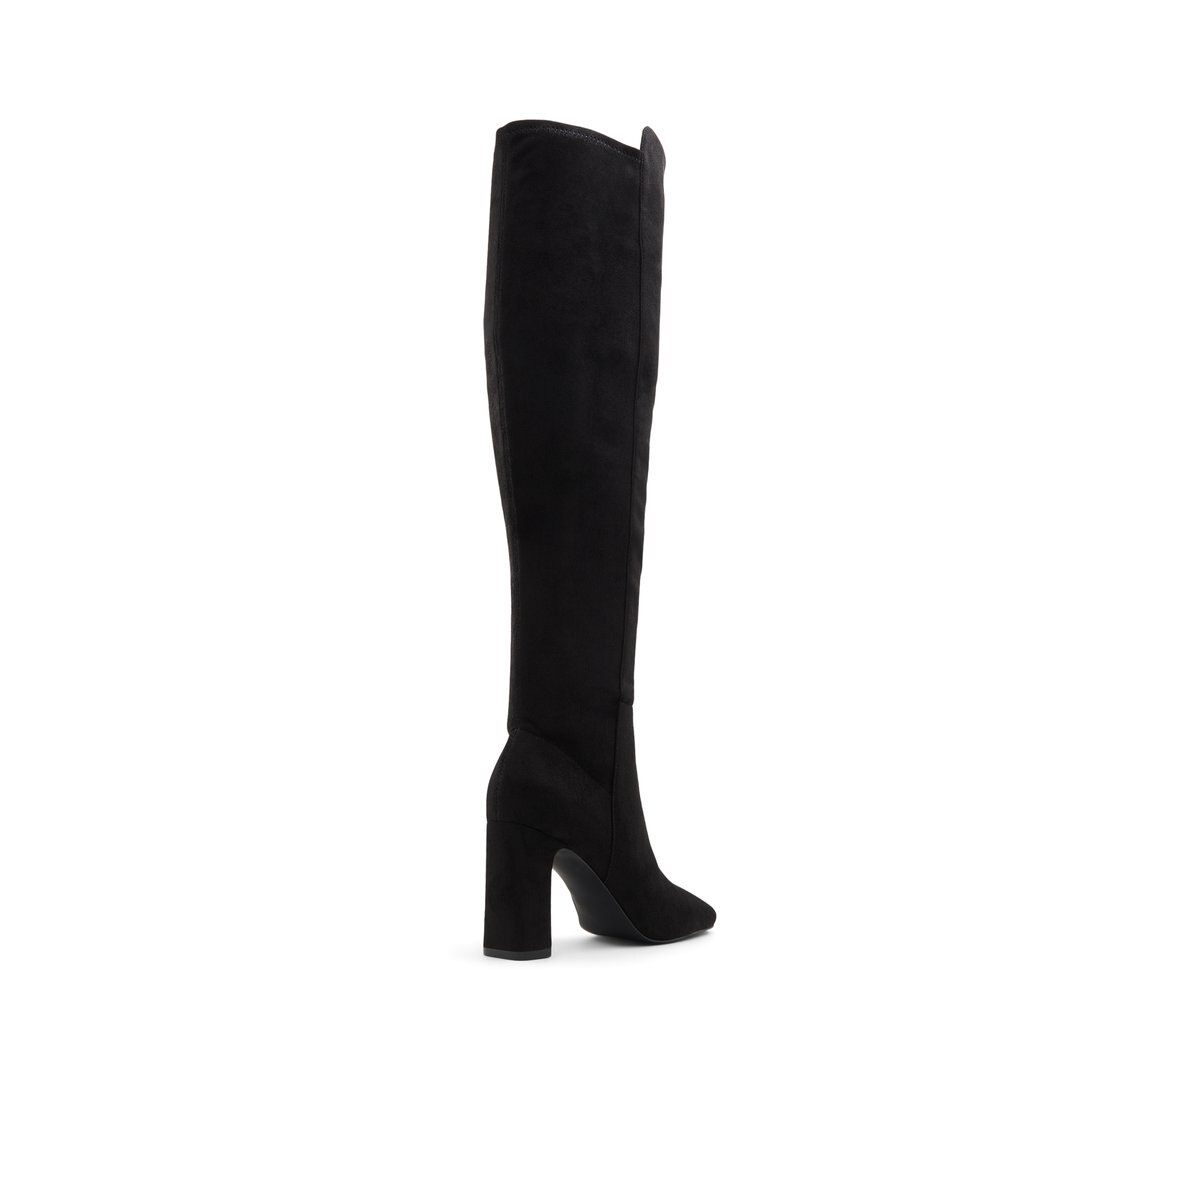 Aisling Open Black Women's Over-the-knee Boots | Call It Spring Canada